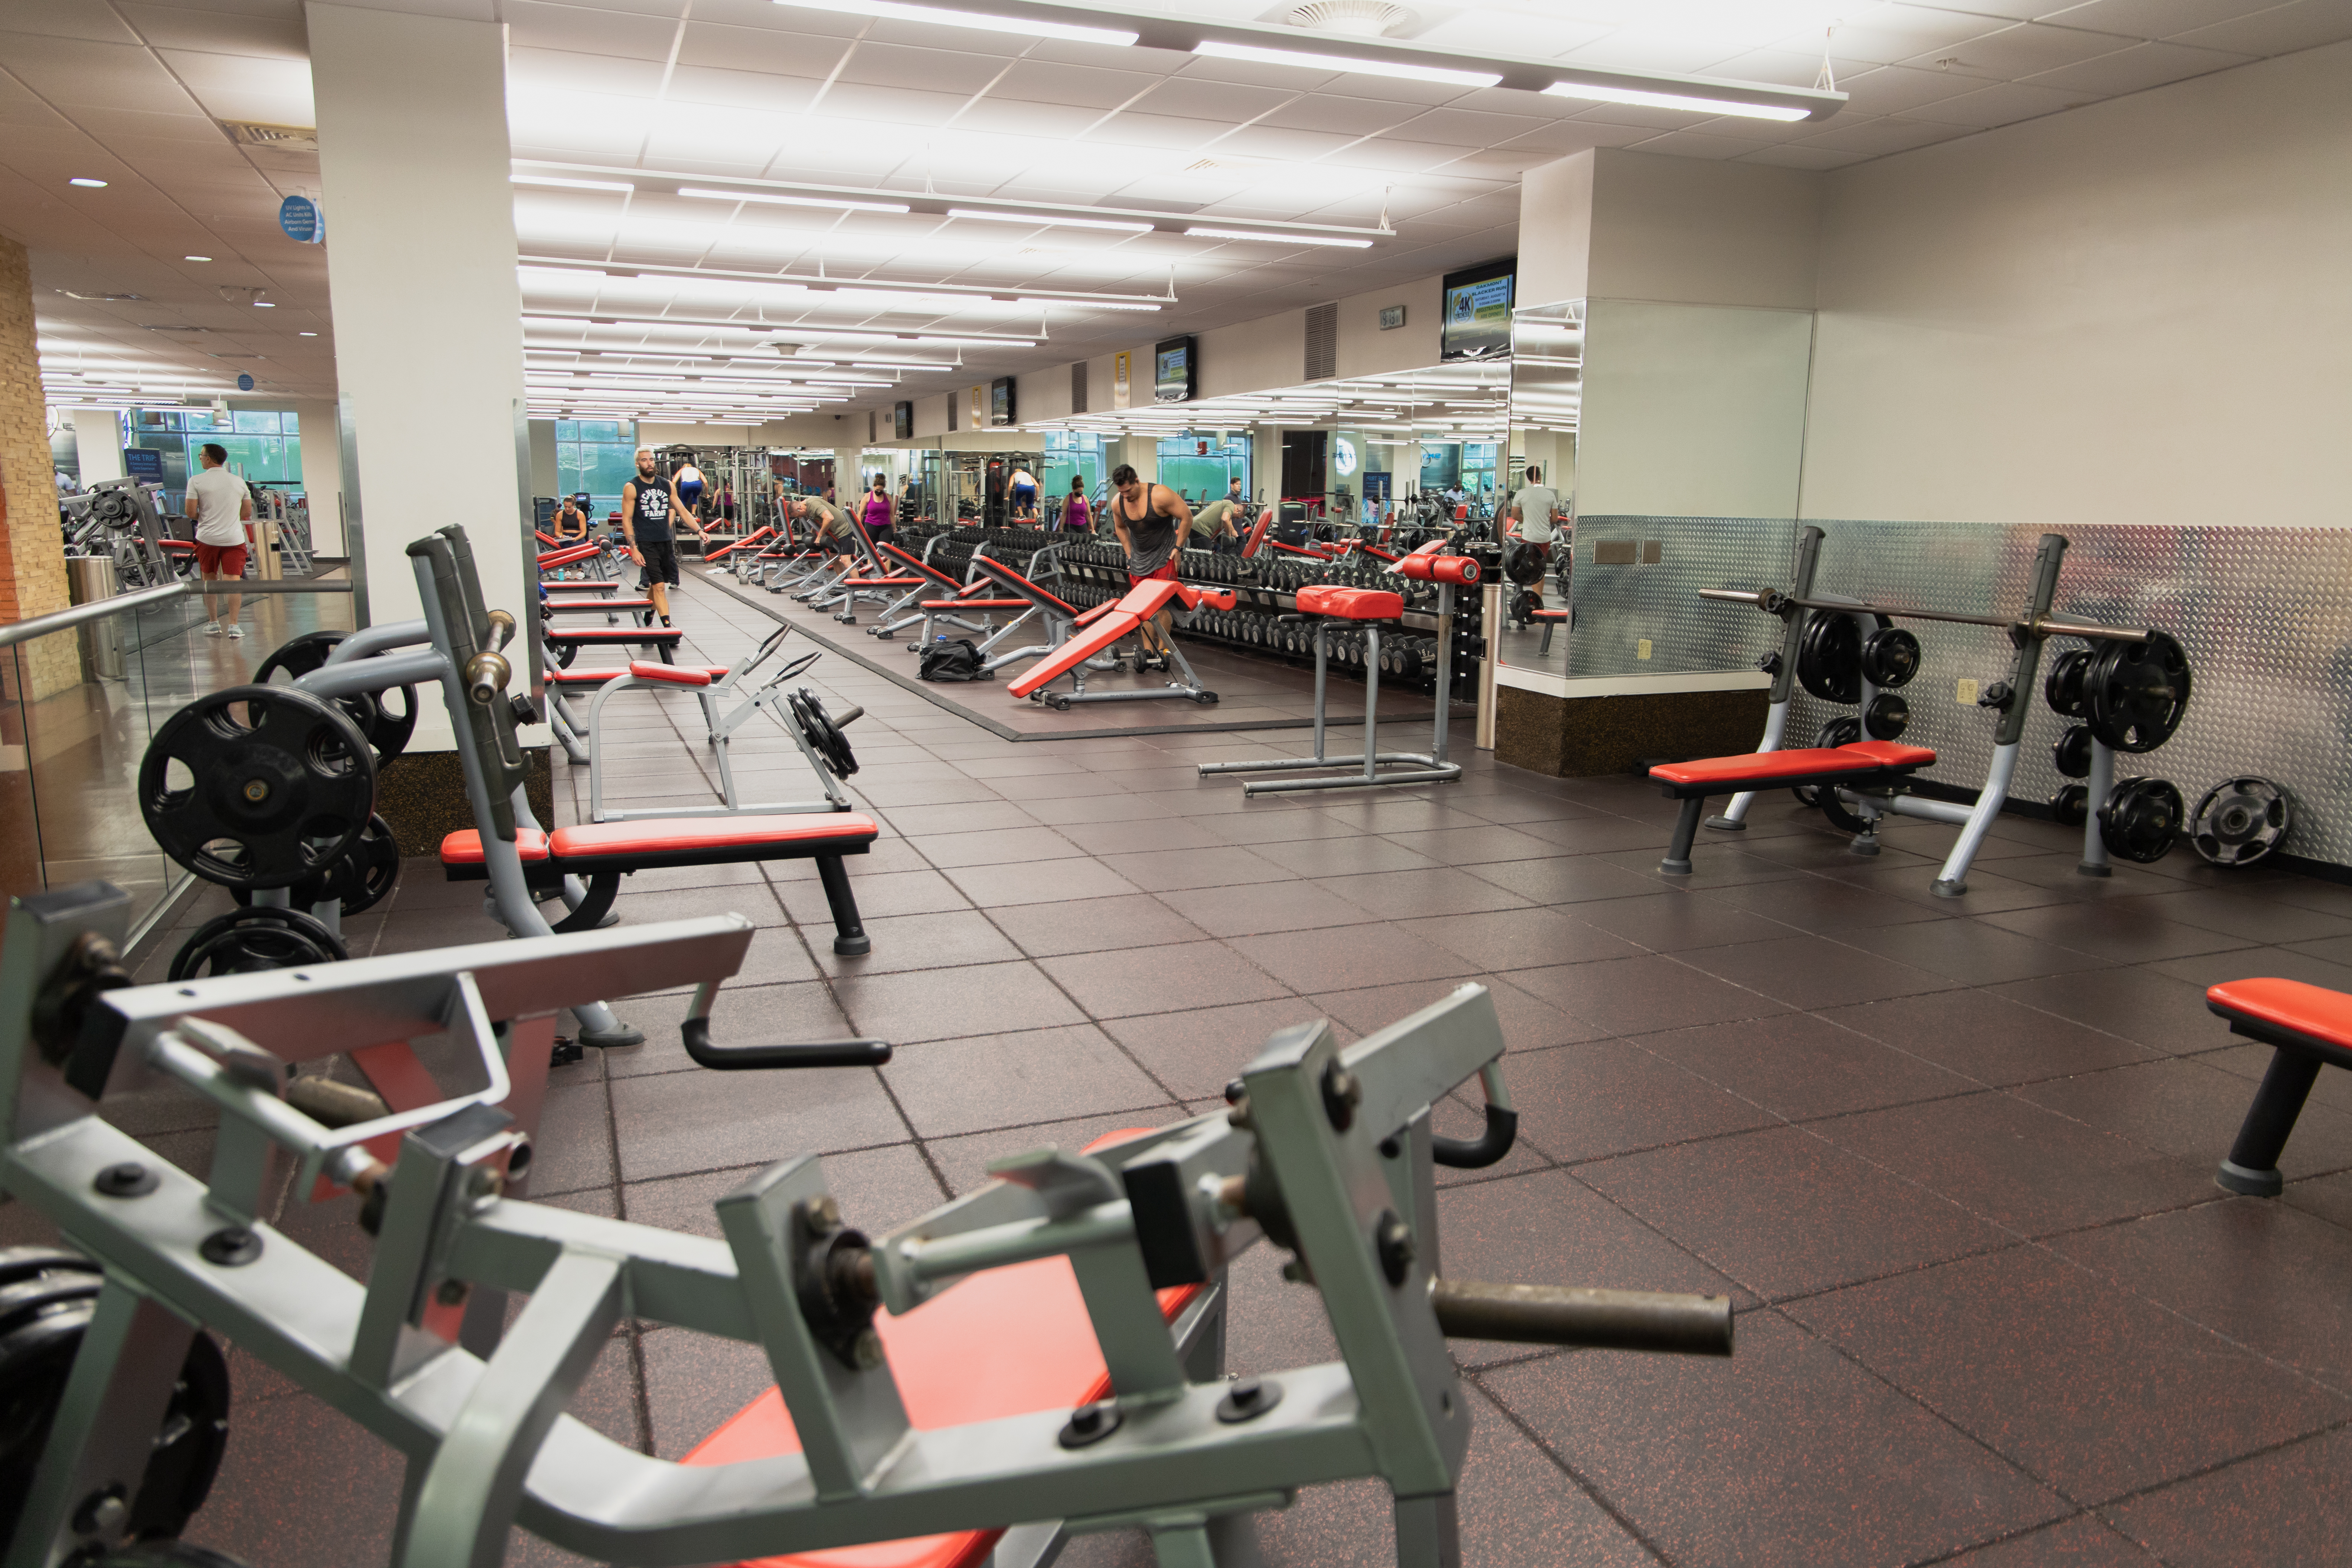 Open free weight space with benches, dumbbells, and barbells at Gainesville's largest gym. Request a free gym pass.